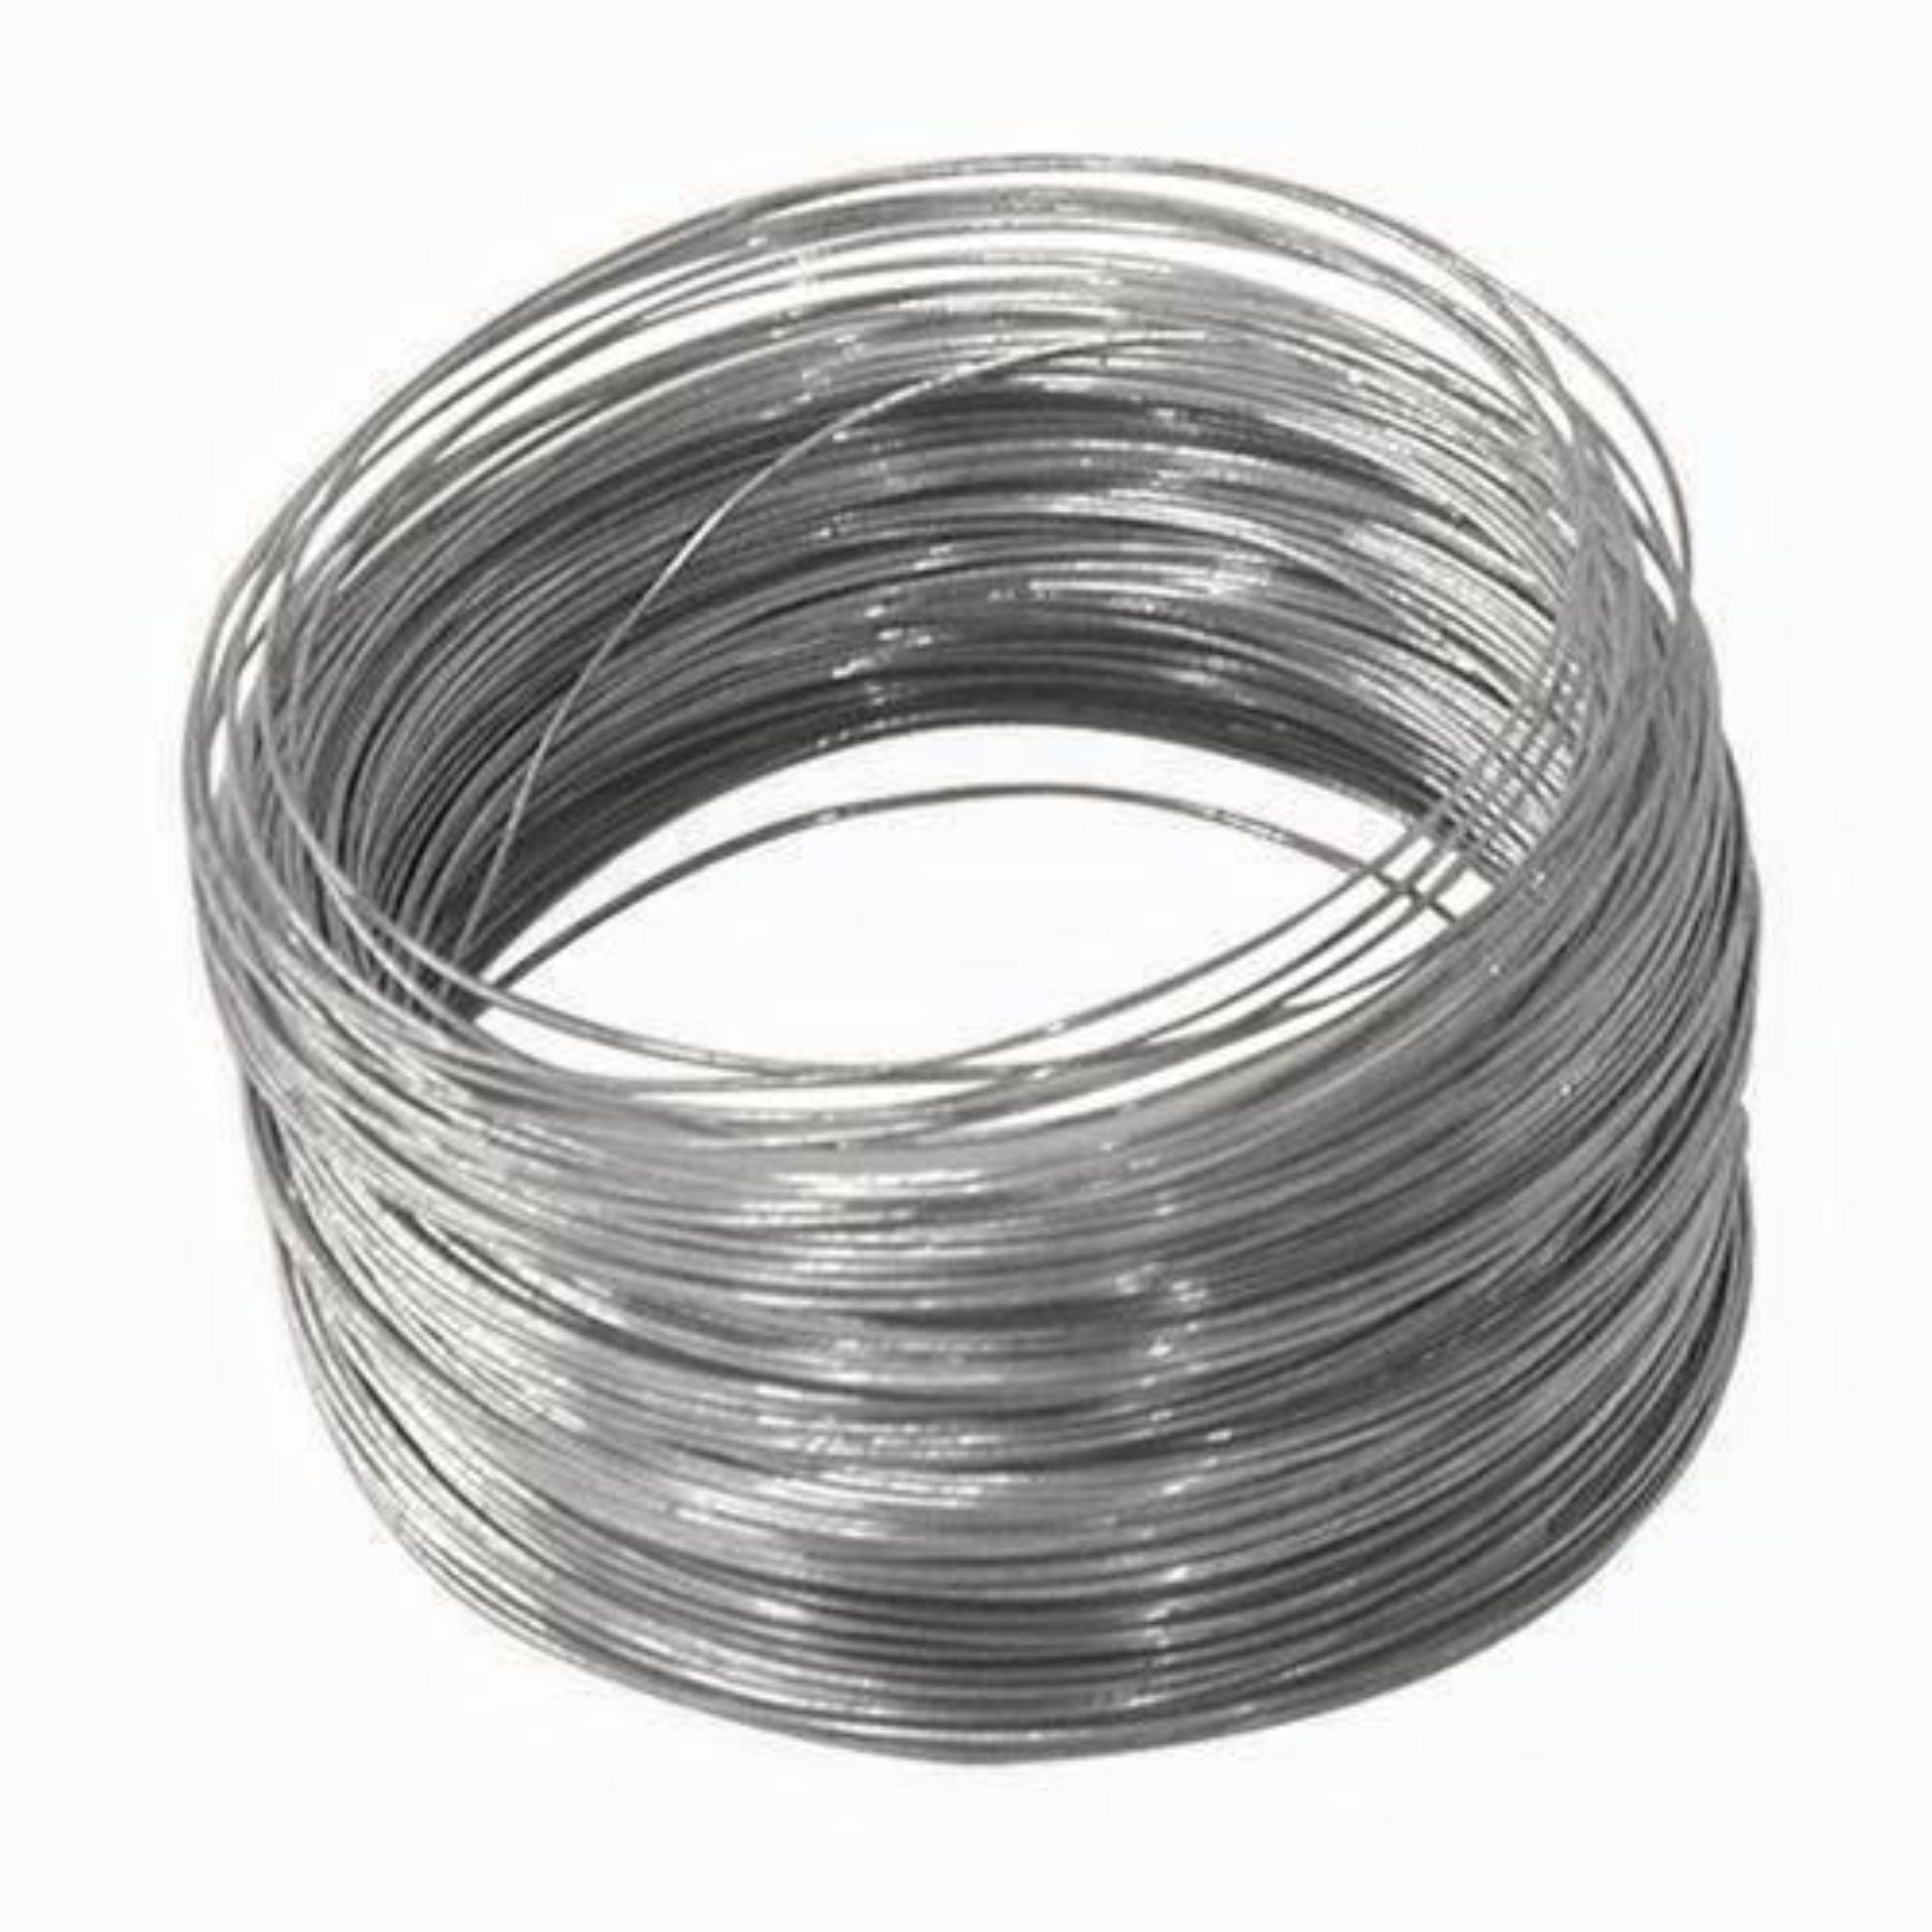 stainless-steel-304-304l-304h-wire-manufacturers-suppliers-stockists-exporters